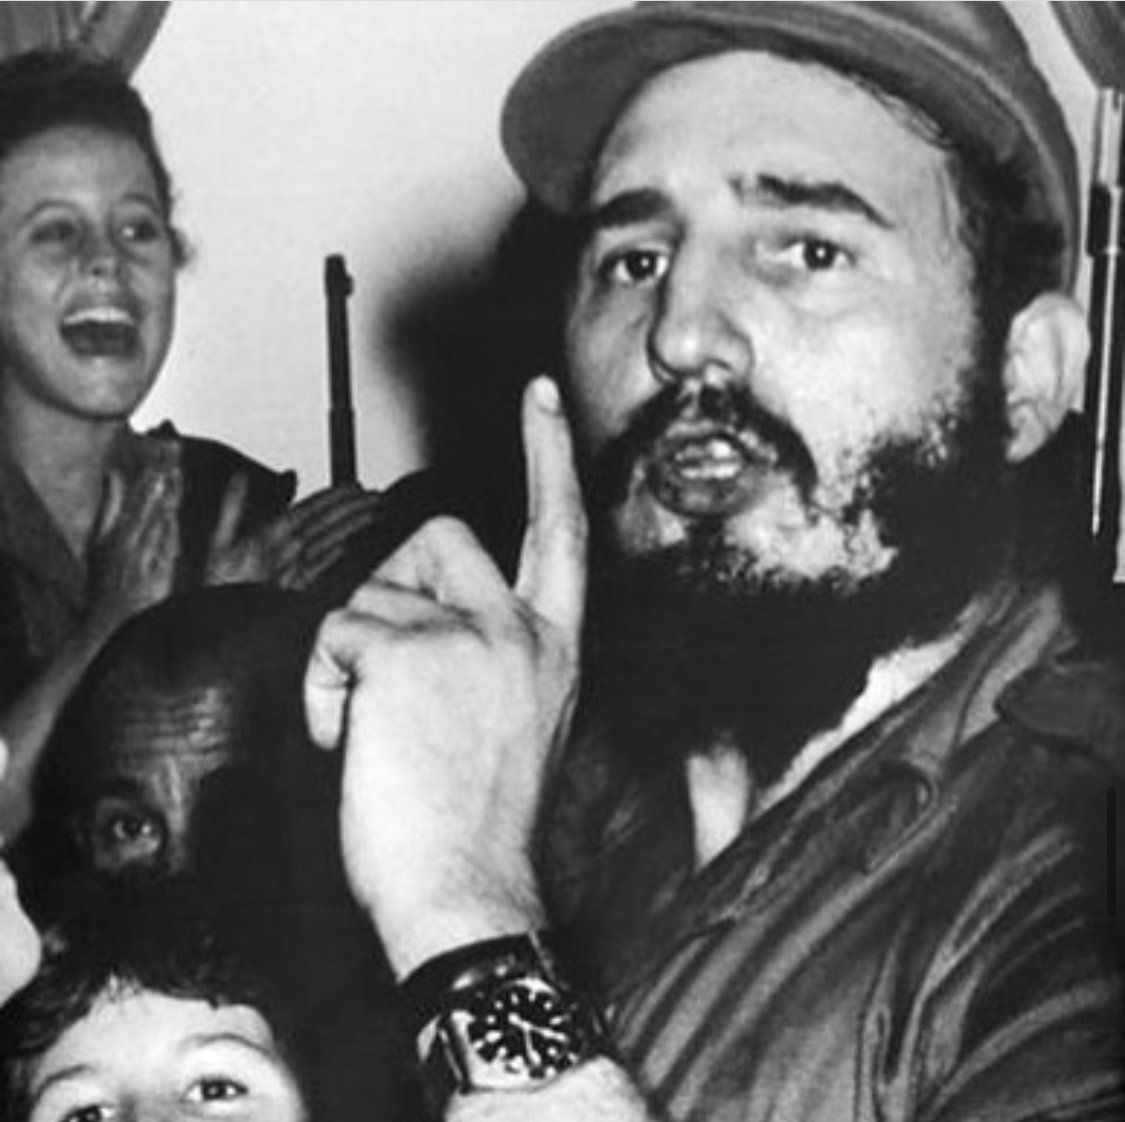 Che Guevara was wearing a Rolex watch, but why could he wear such